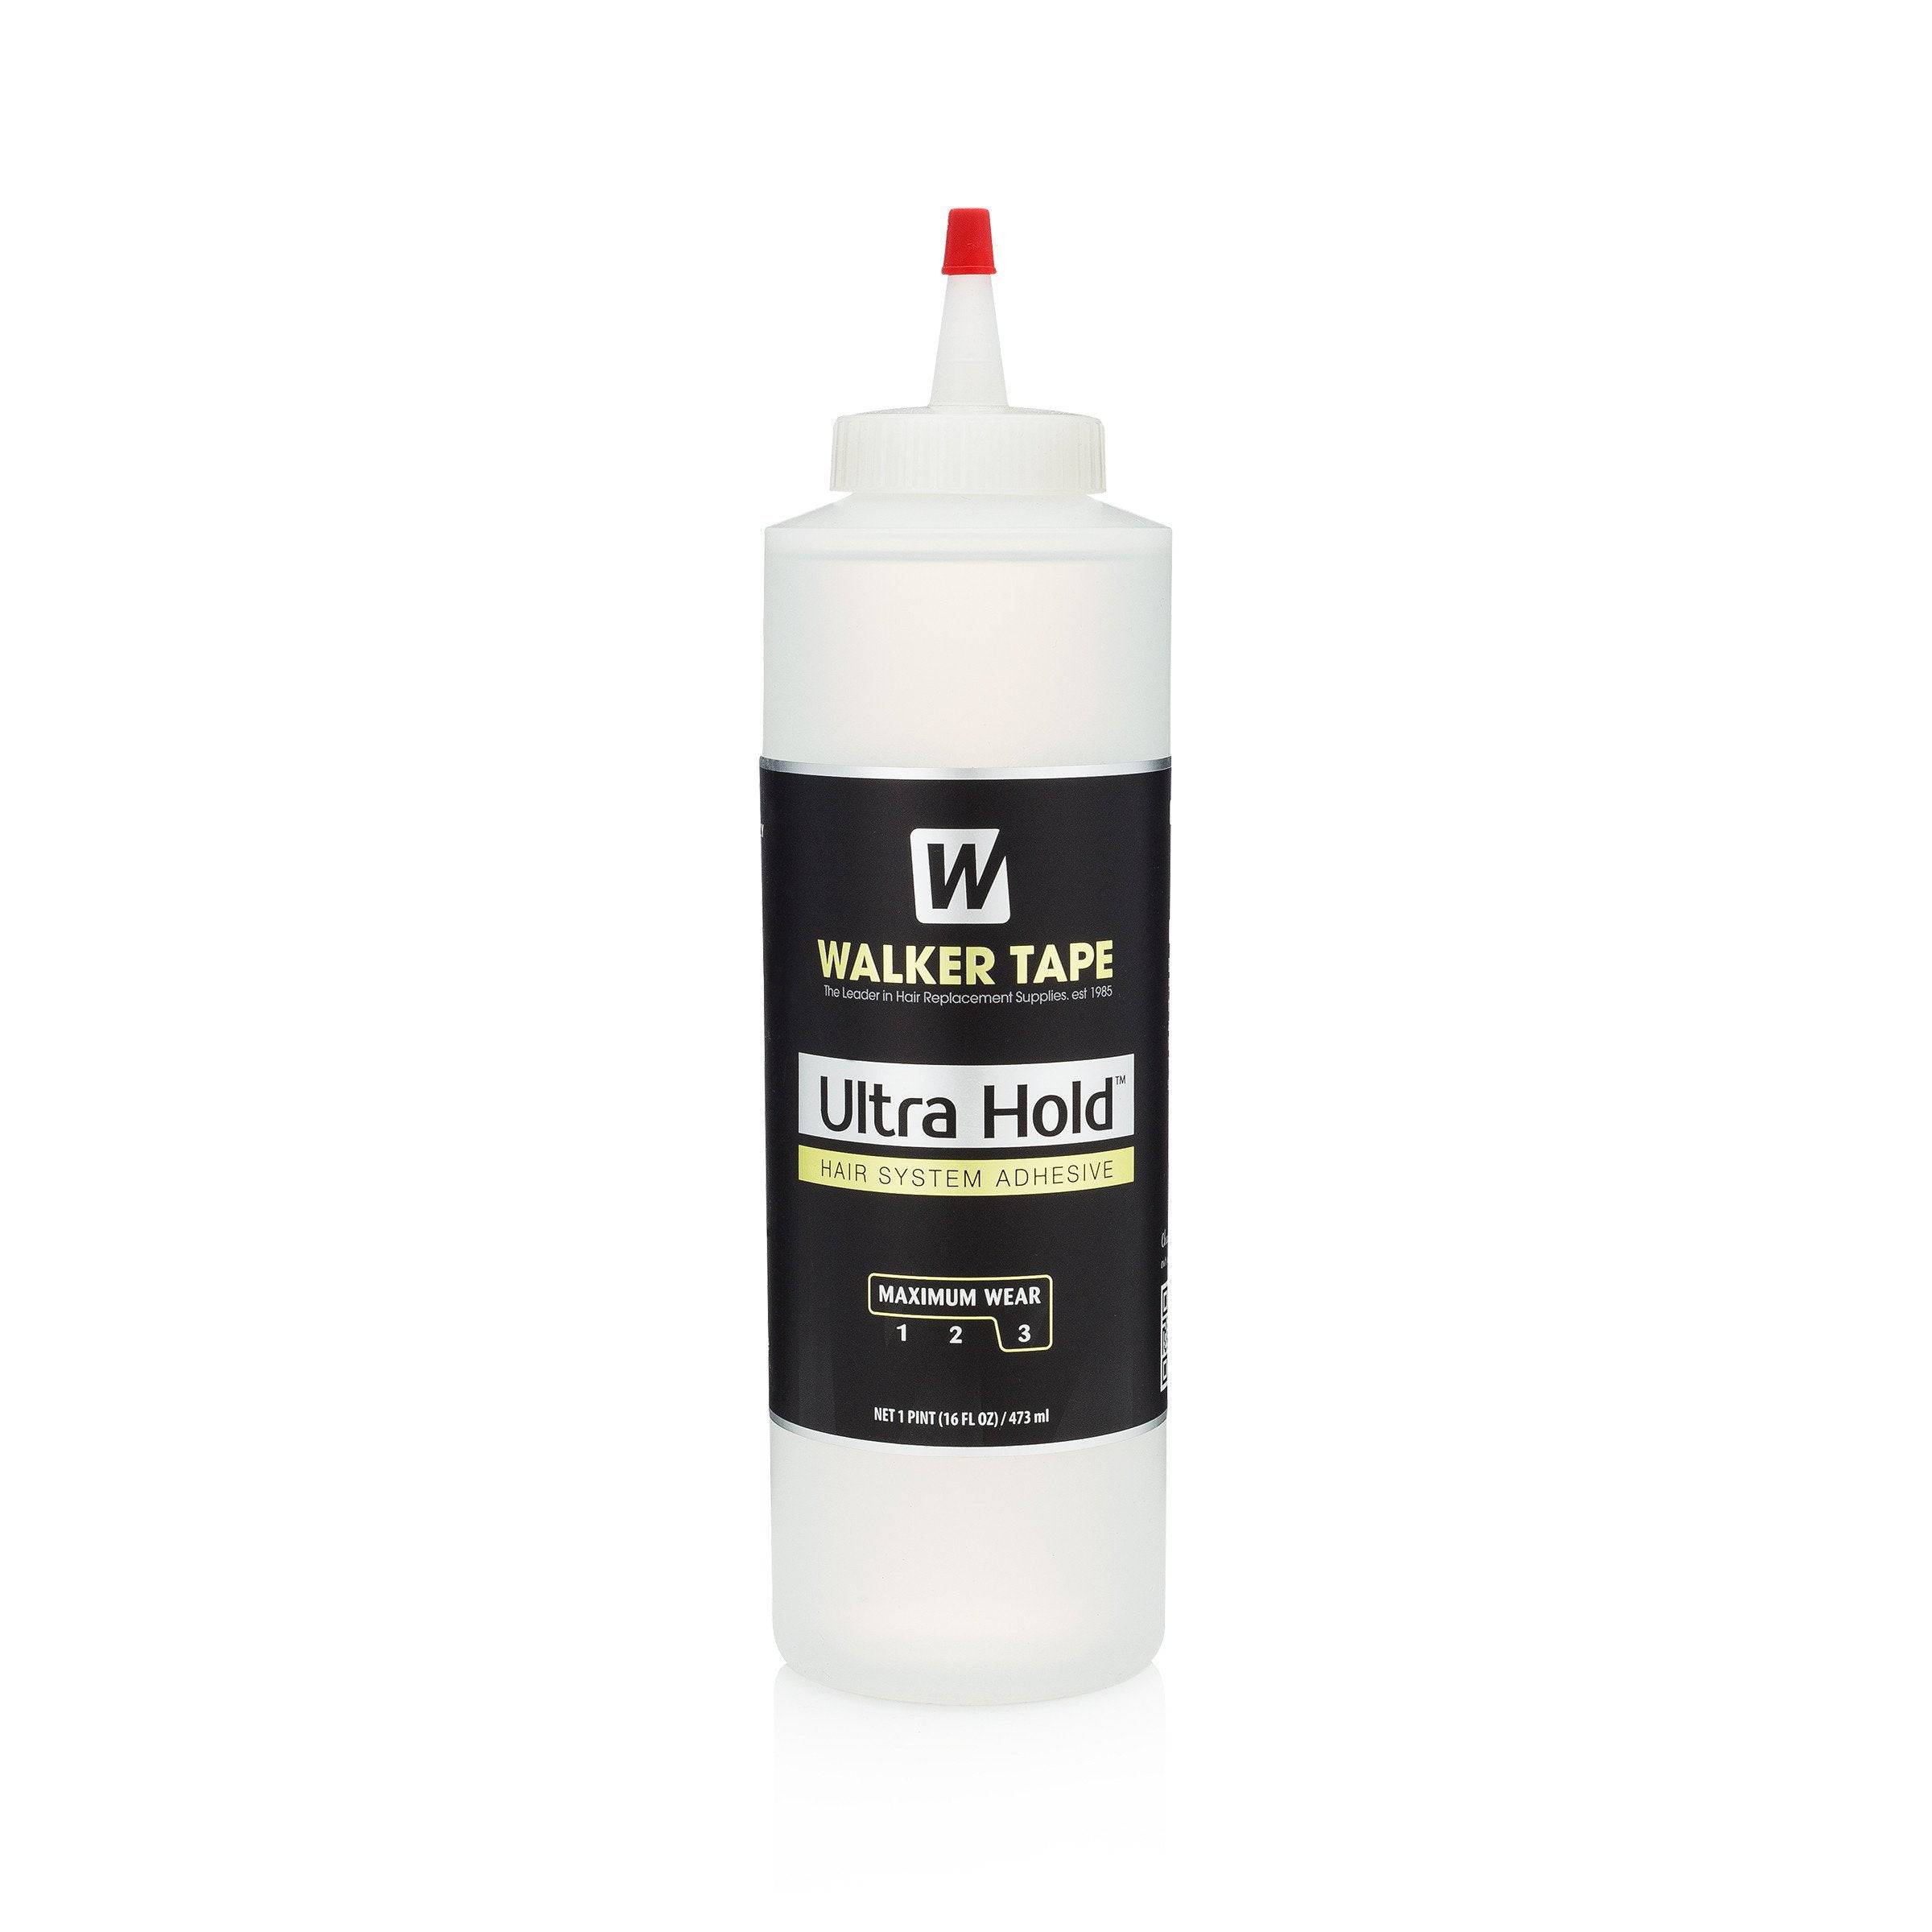 WALKER TAPE ULTRA HOLD ADHESIVE - 3.4 OZ